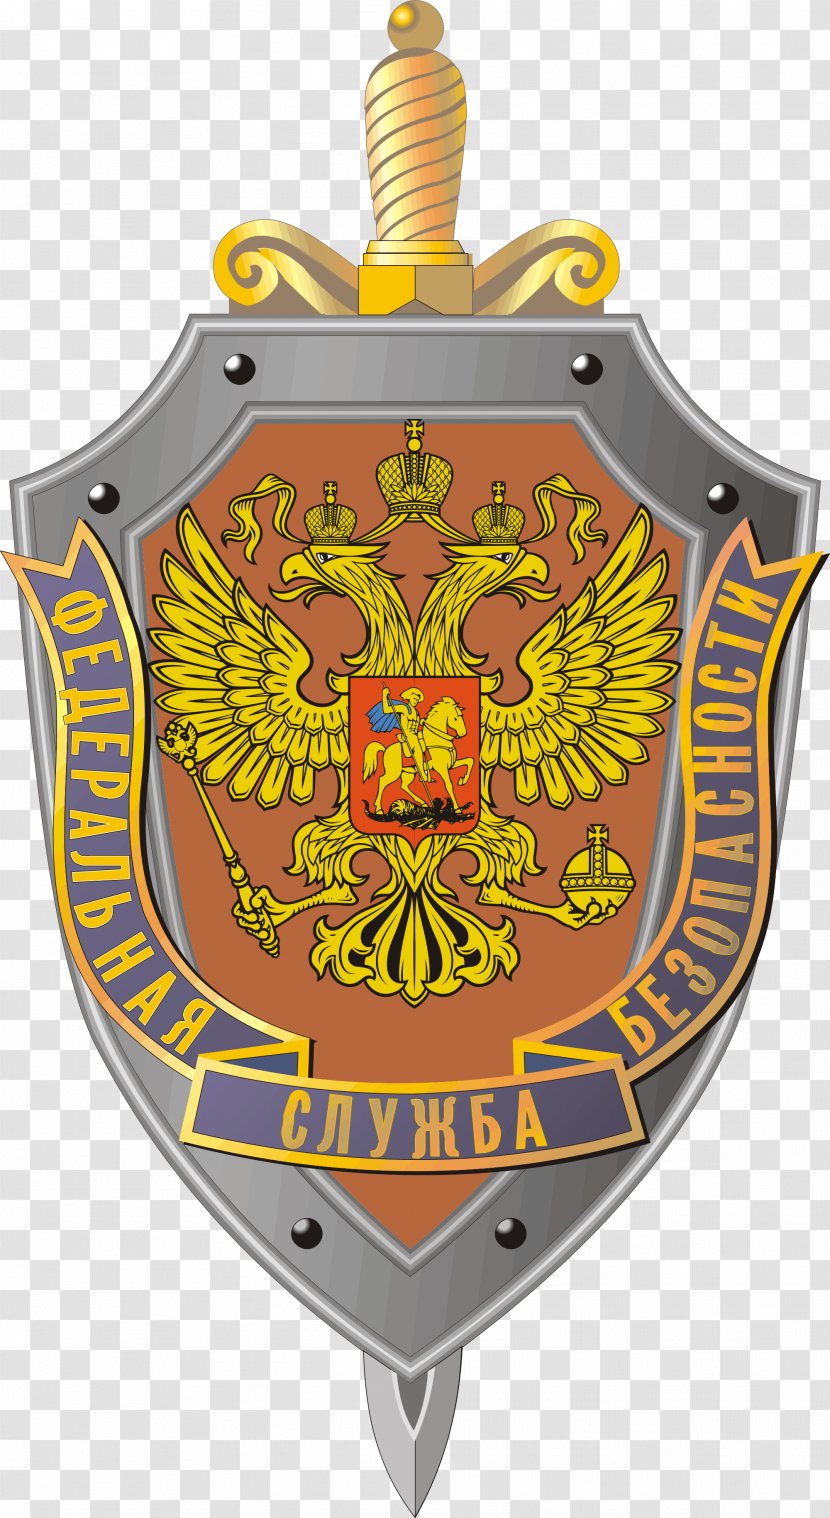 FSB Academy United States Federal Security Service Espionage Intelligence Agency - Symbol - Russia Transparent PNG